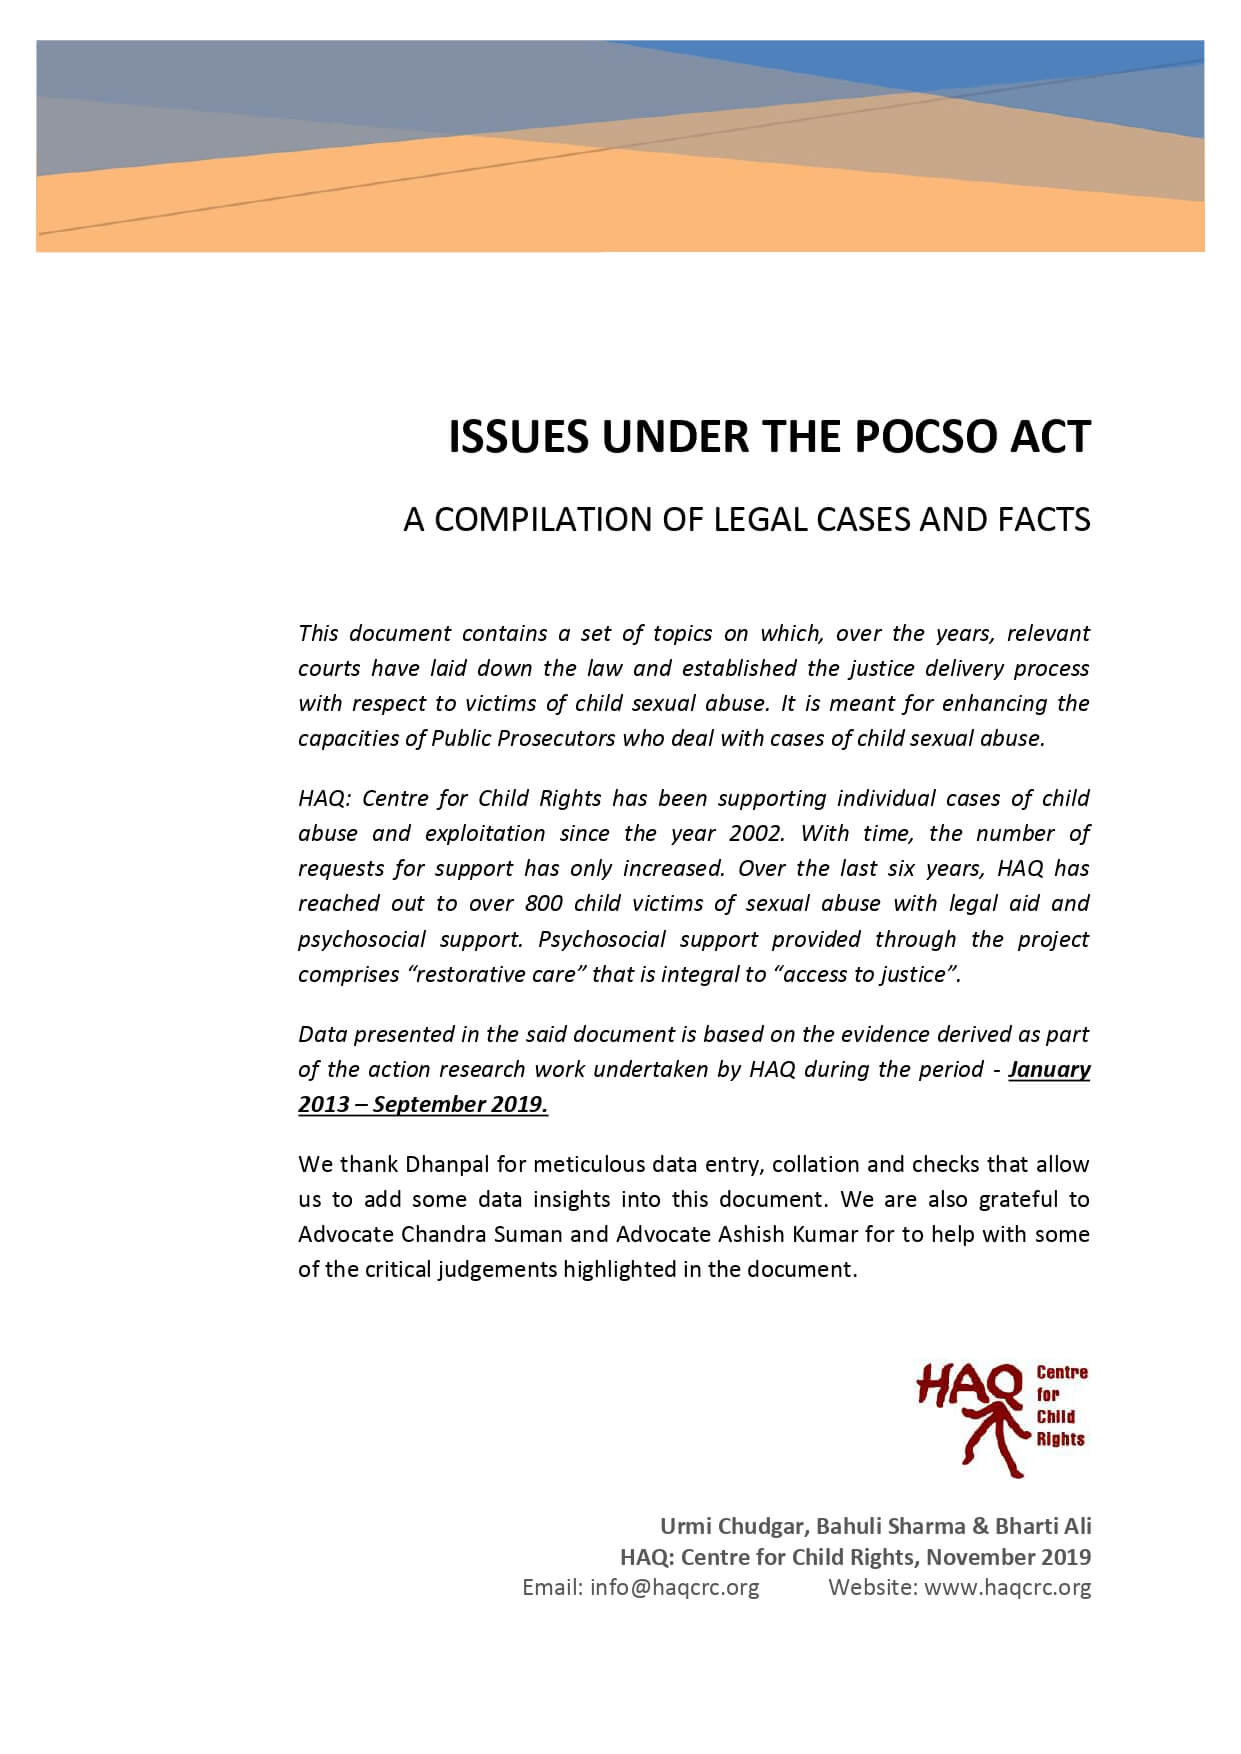 HANDBOOK FOR PUBLIC PROSECUTORS – ISSUES UNDER THE POCSO ACT